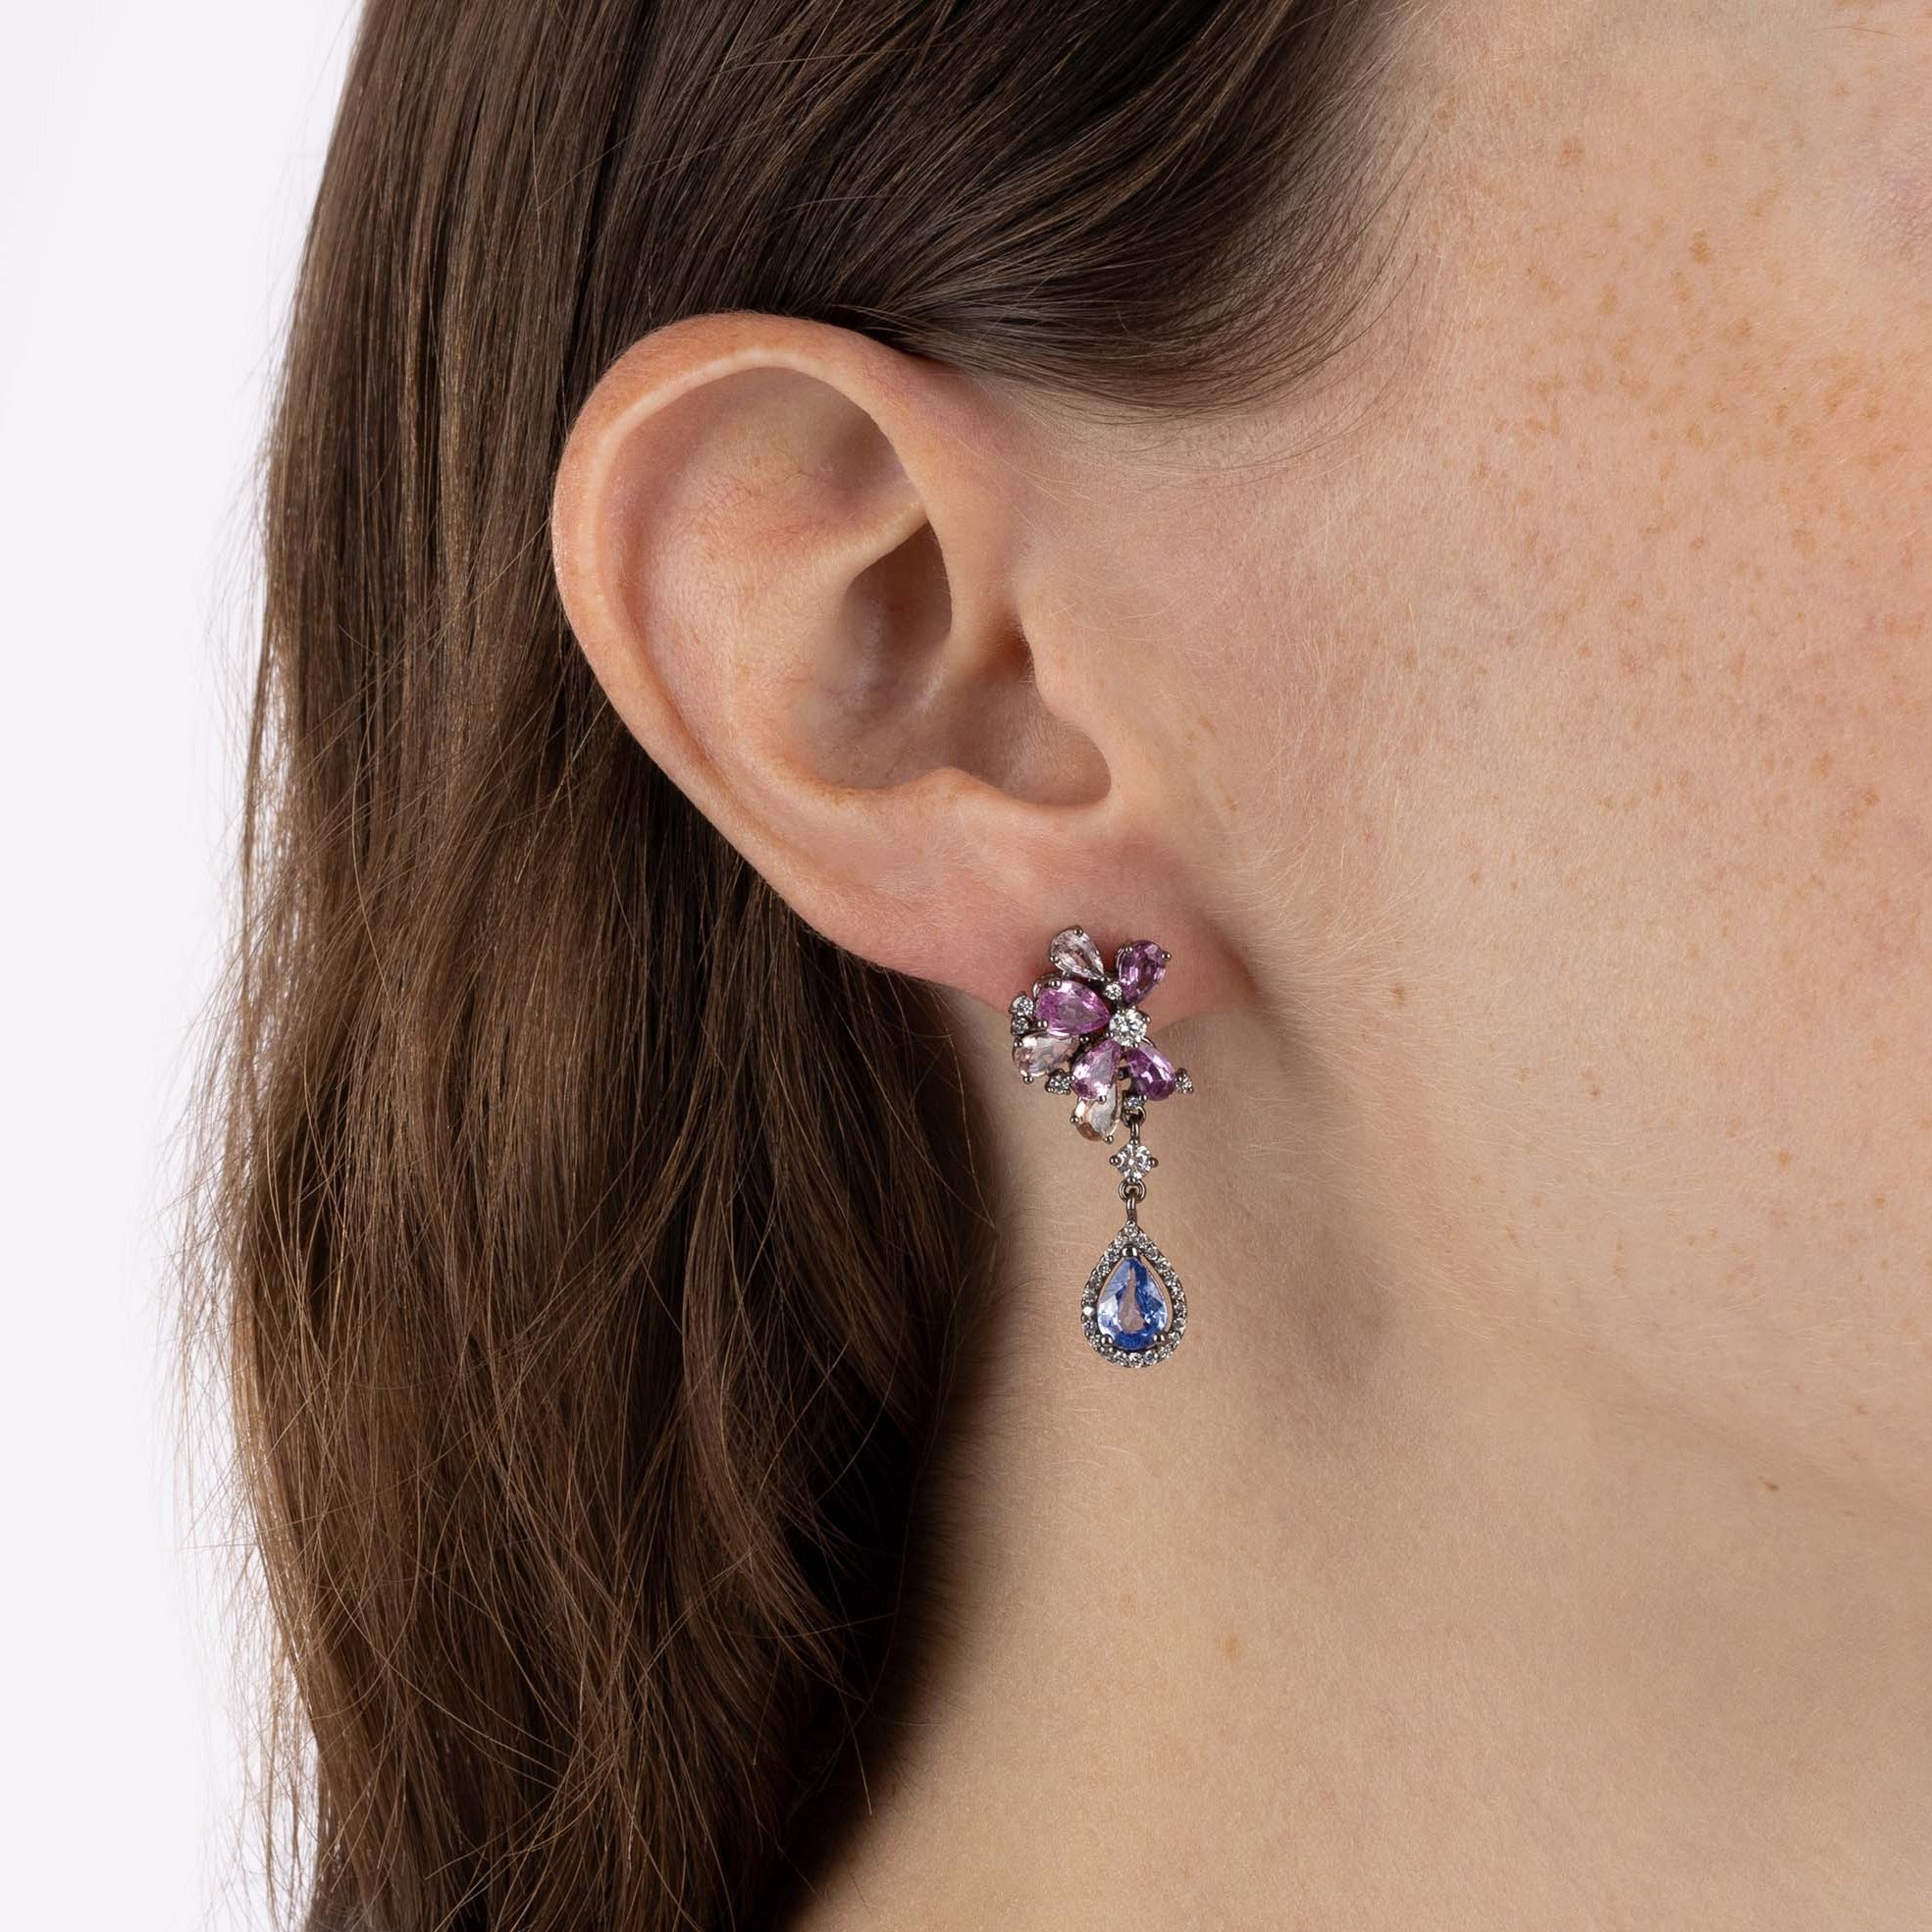 Rhodium Plated Gold Earrings with Pink and Blue Sapphires, and Diamonds, Medium - Model shot